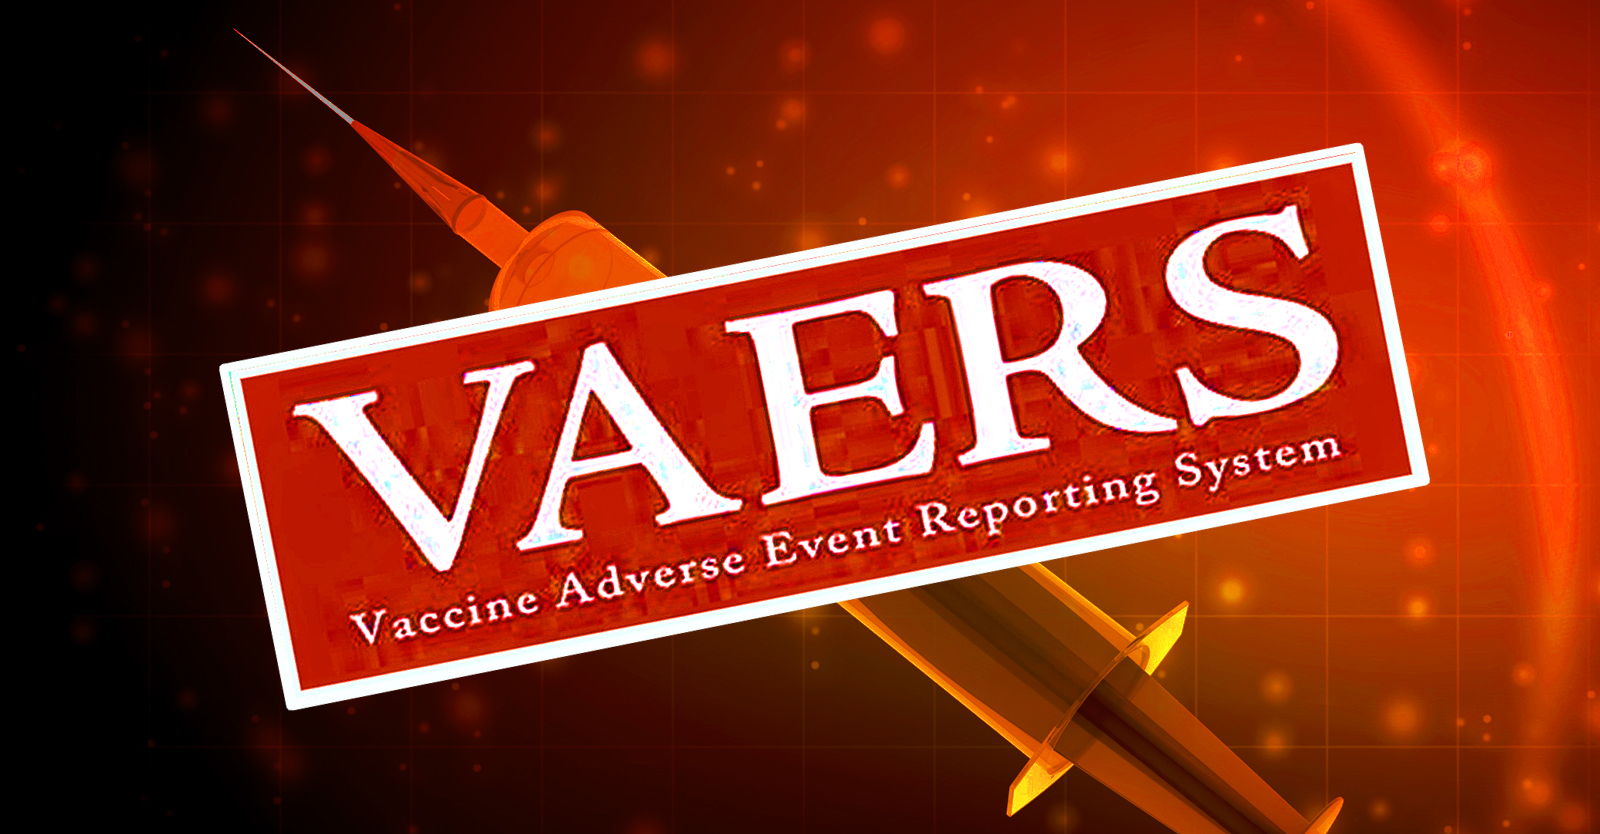 CDC Admits It Never Monitored VAERS for COVID Vaccine Safety Signals